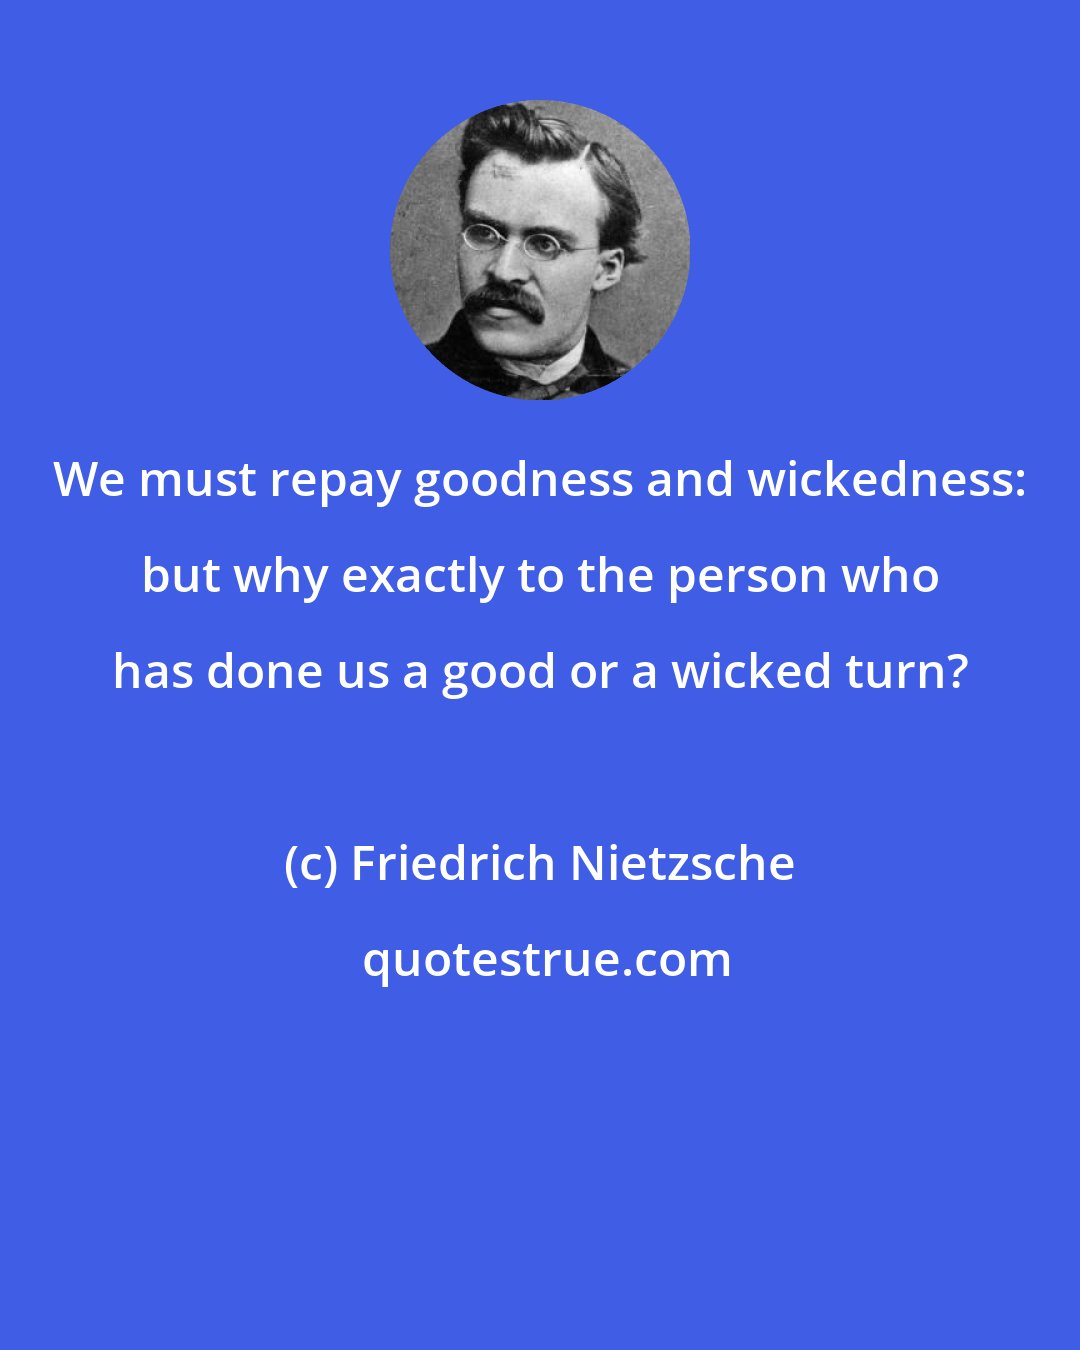 Friedrich Nietzsche: We must repay goodness and wickedness: but why exactly to the person who has done us a good or a wicked turn?